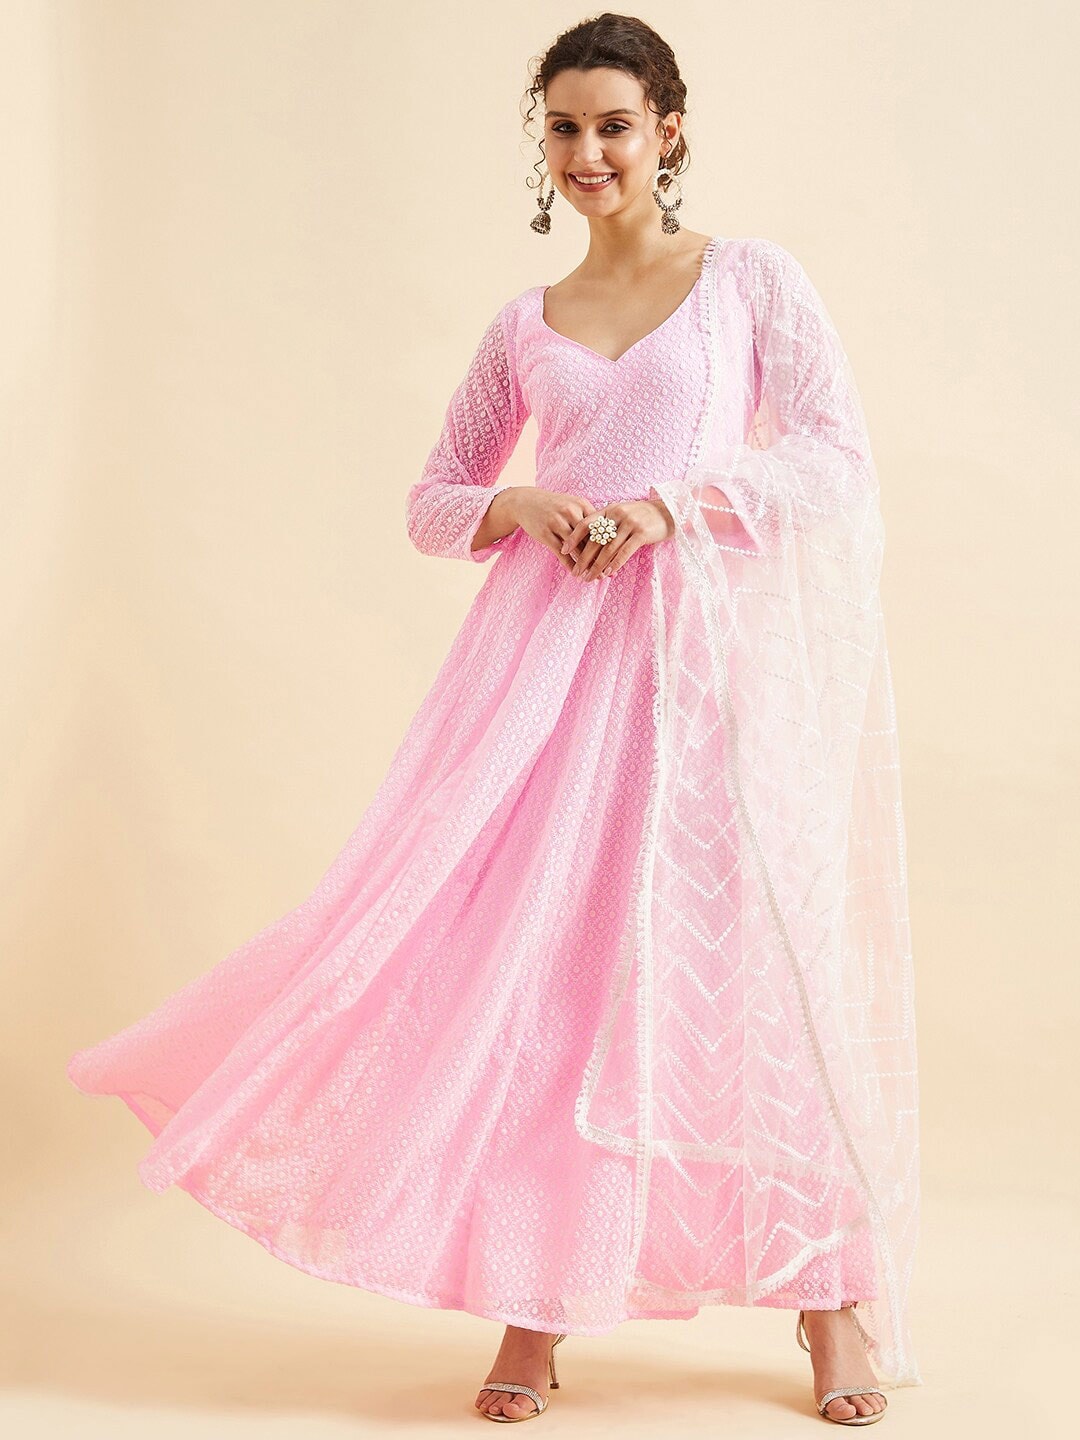 PANIT Pink Georgette Ethnic Maxi Maxi Dress Price in India